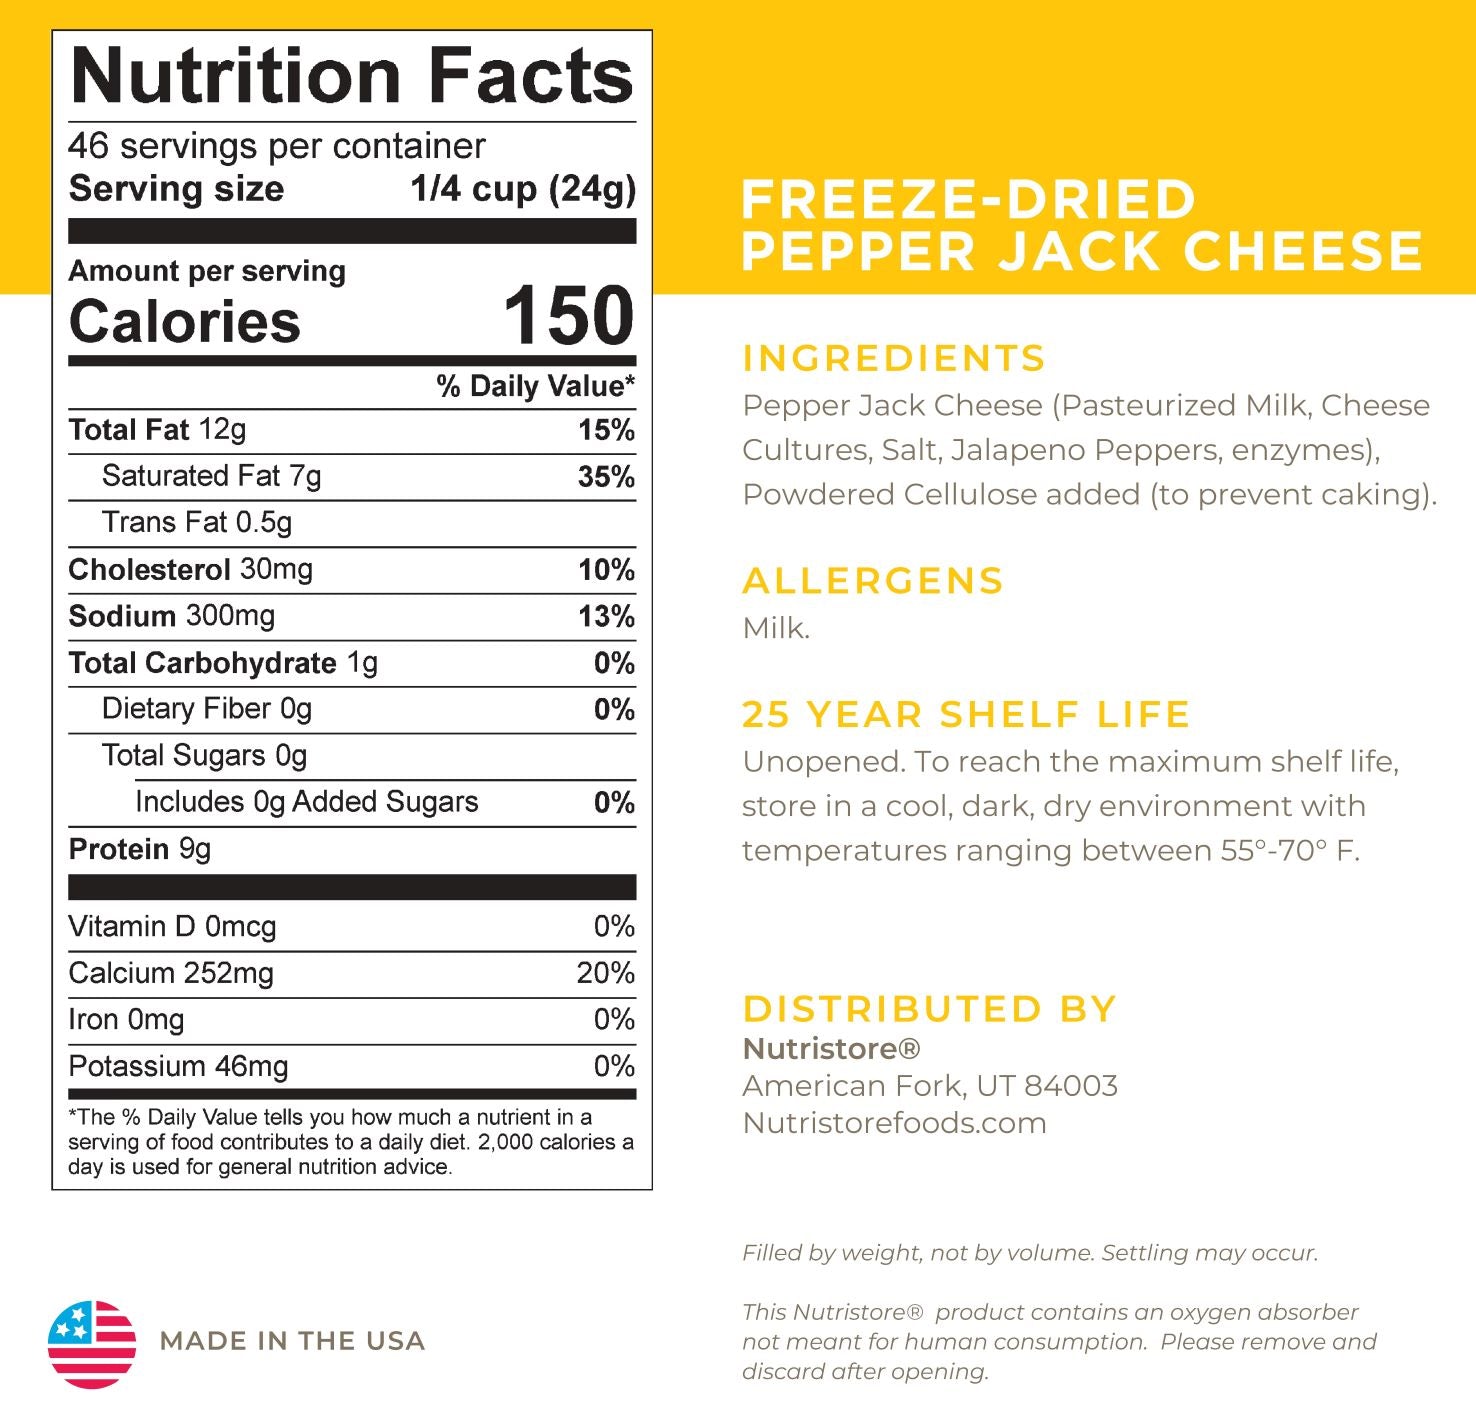 Pepper Jack Cheese Freeze Dried - #10 Can